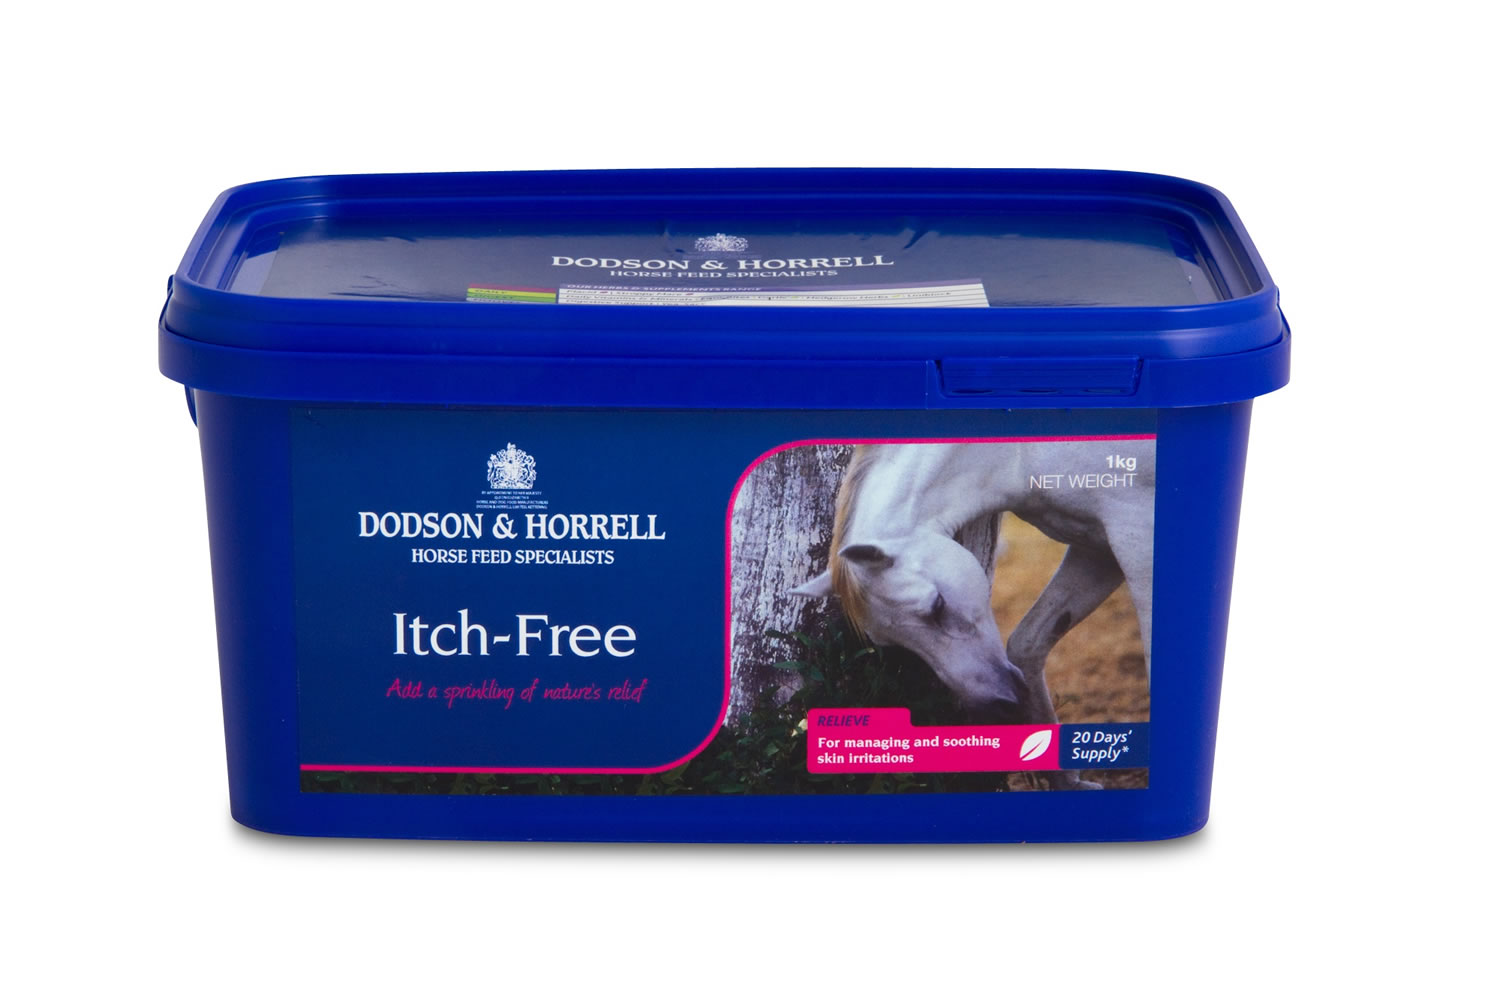 DODSON & HORRELL ITCH-FREE 1 KG 1 KG